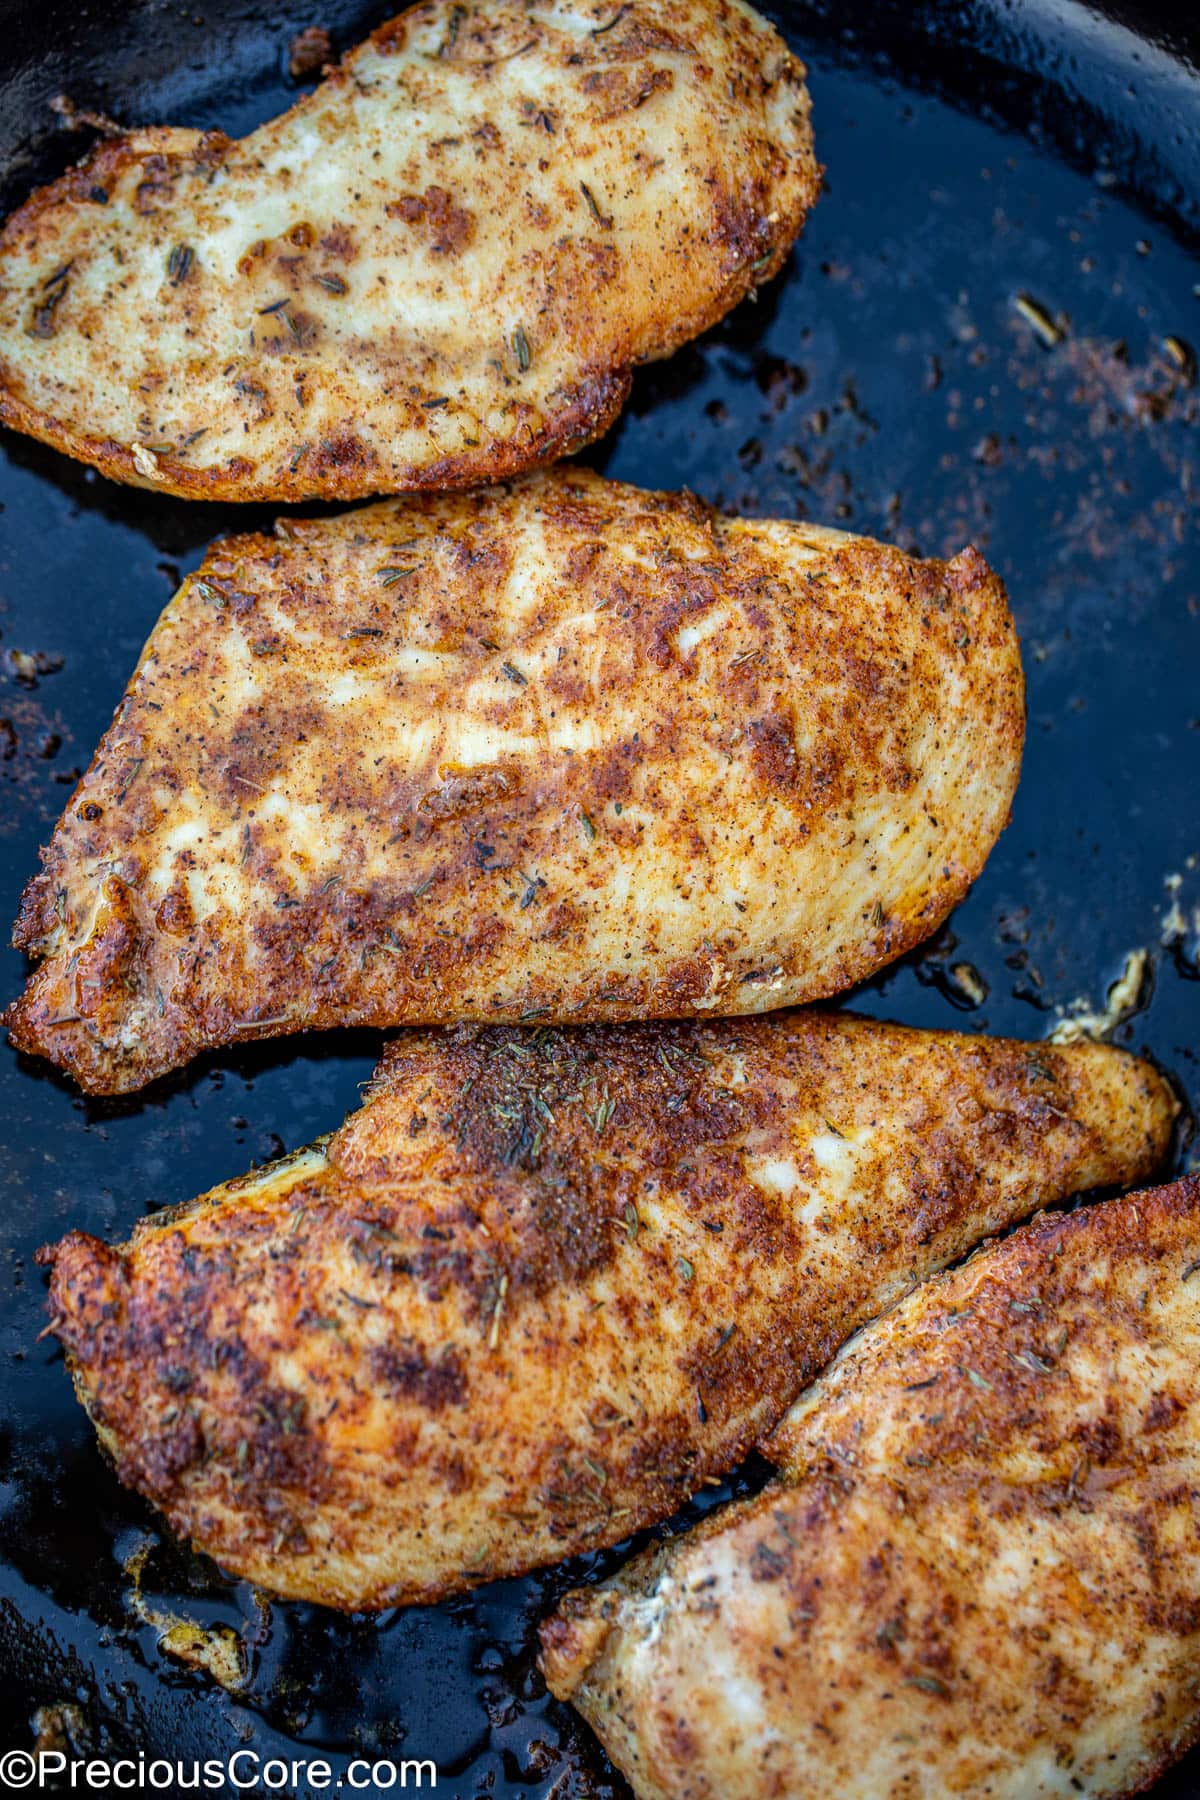 Seared thin sliced chicken breasts in skillet.